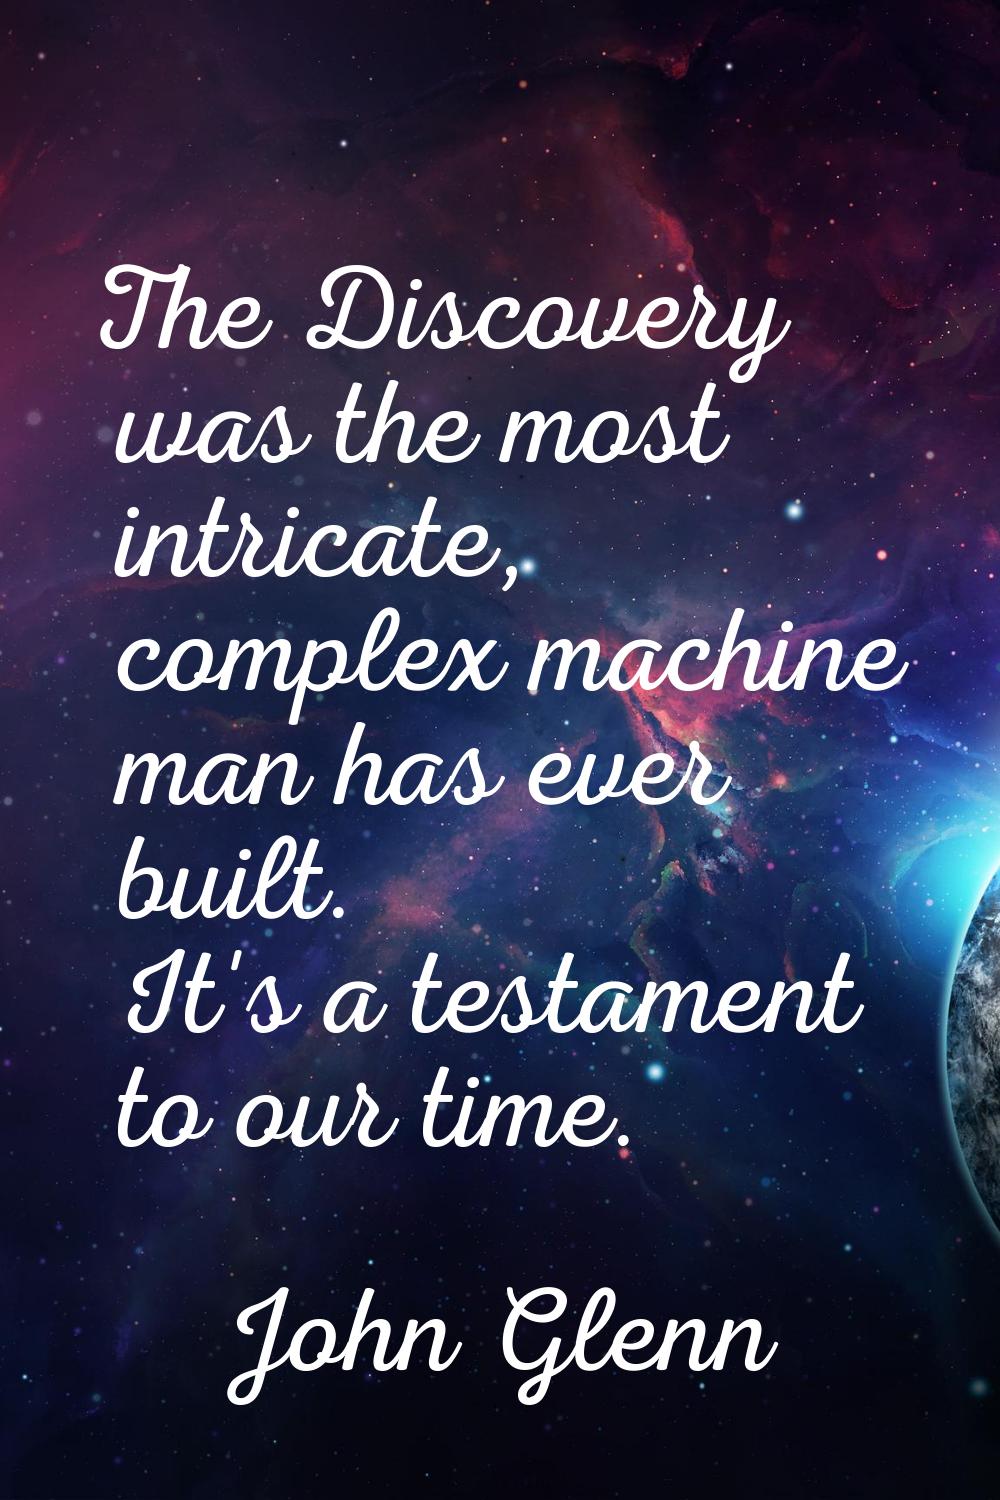 The Discovery was the most intricate, complex machine man has ever built. It's a testament to our t